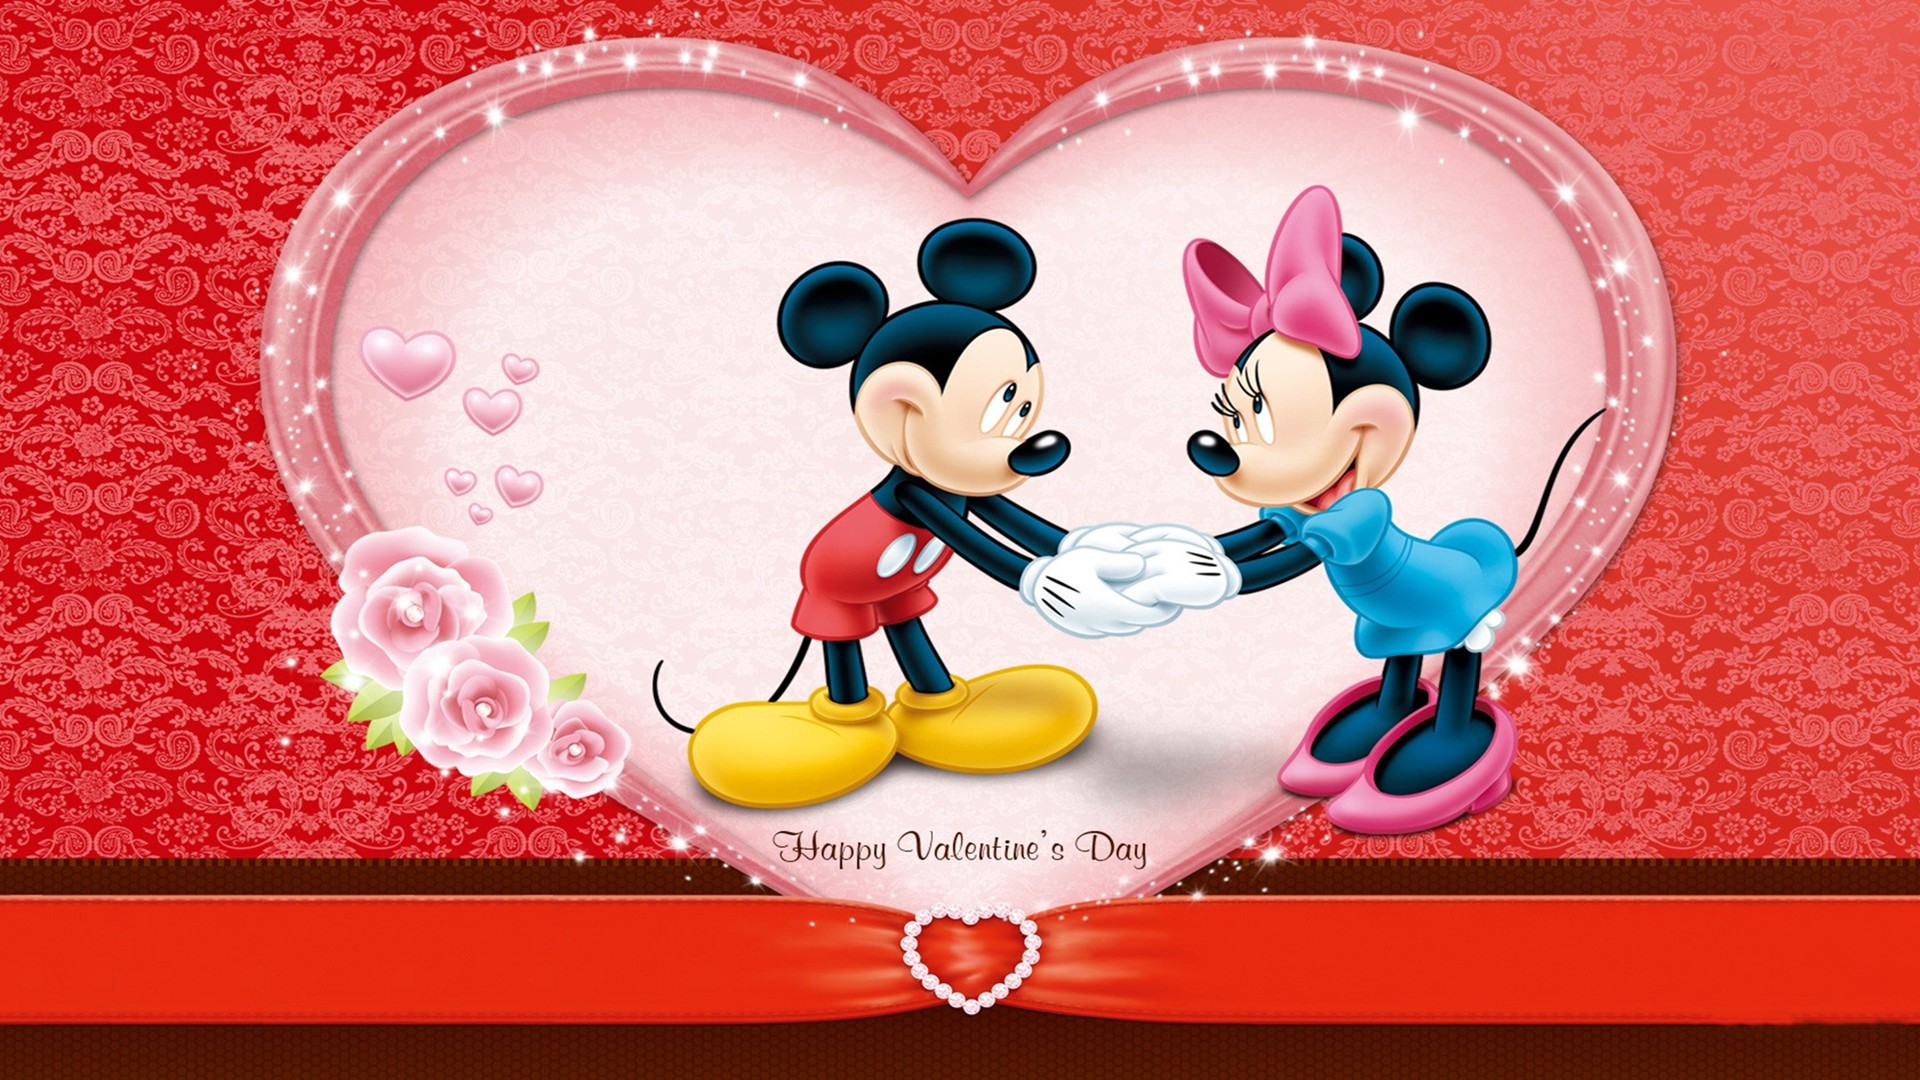 Cute Mickey Wishes Happy Valentines Day Wallpaper With